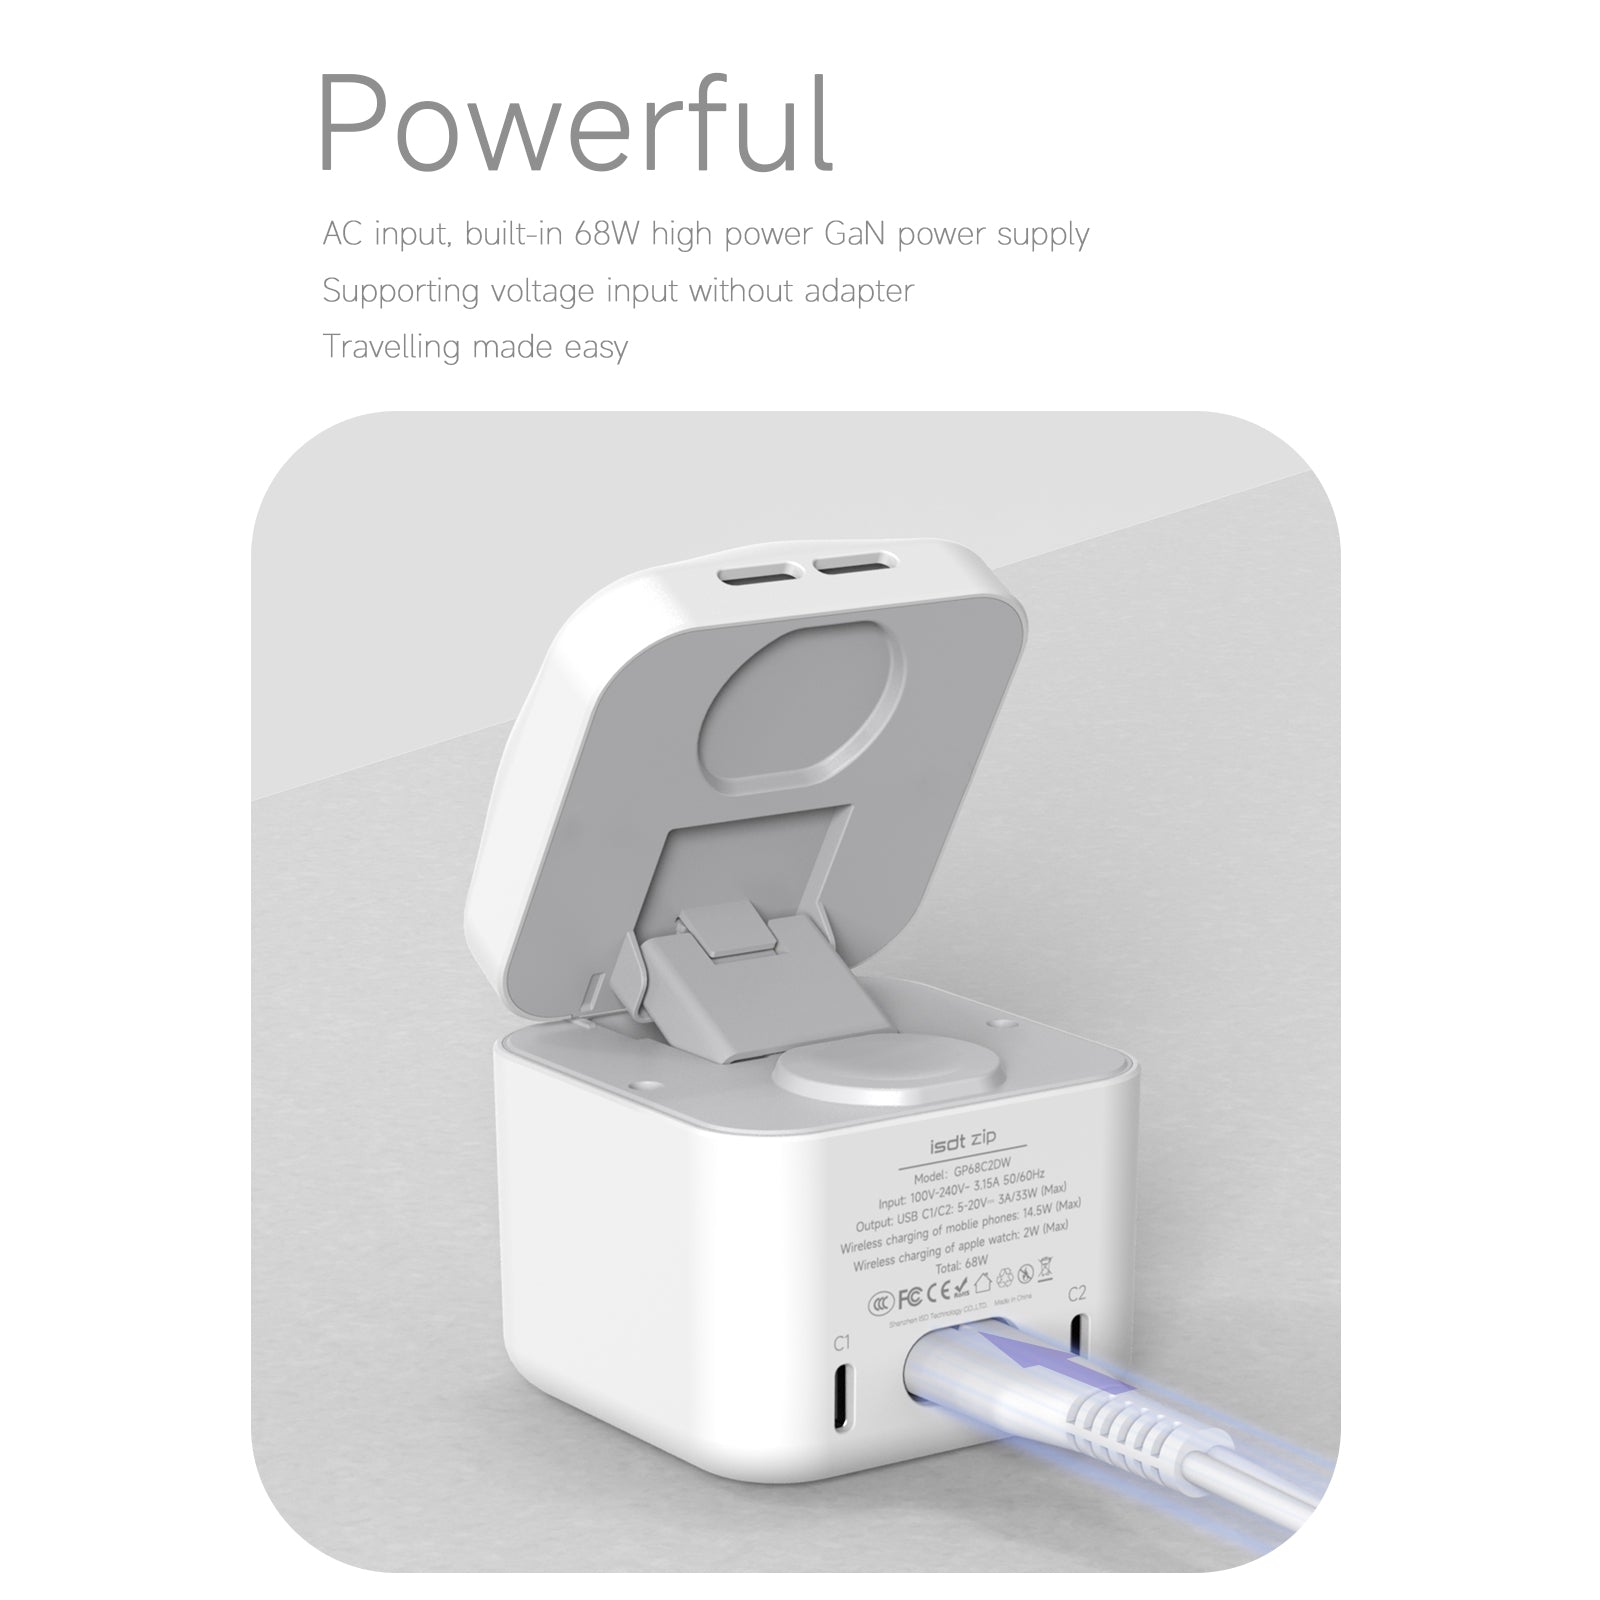 zip Magsafe Charger Stand,3 in 1 Wireless Magsafe Charger with